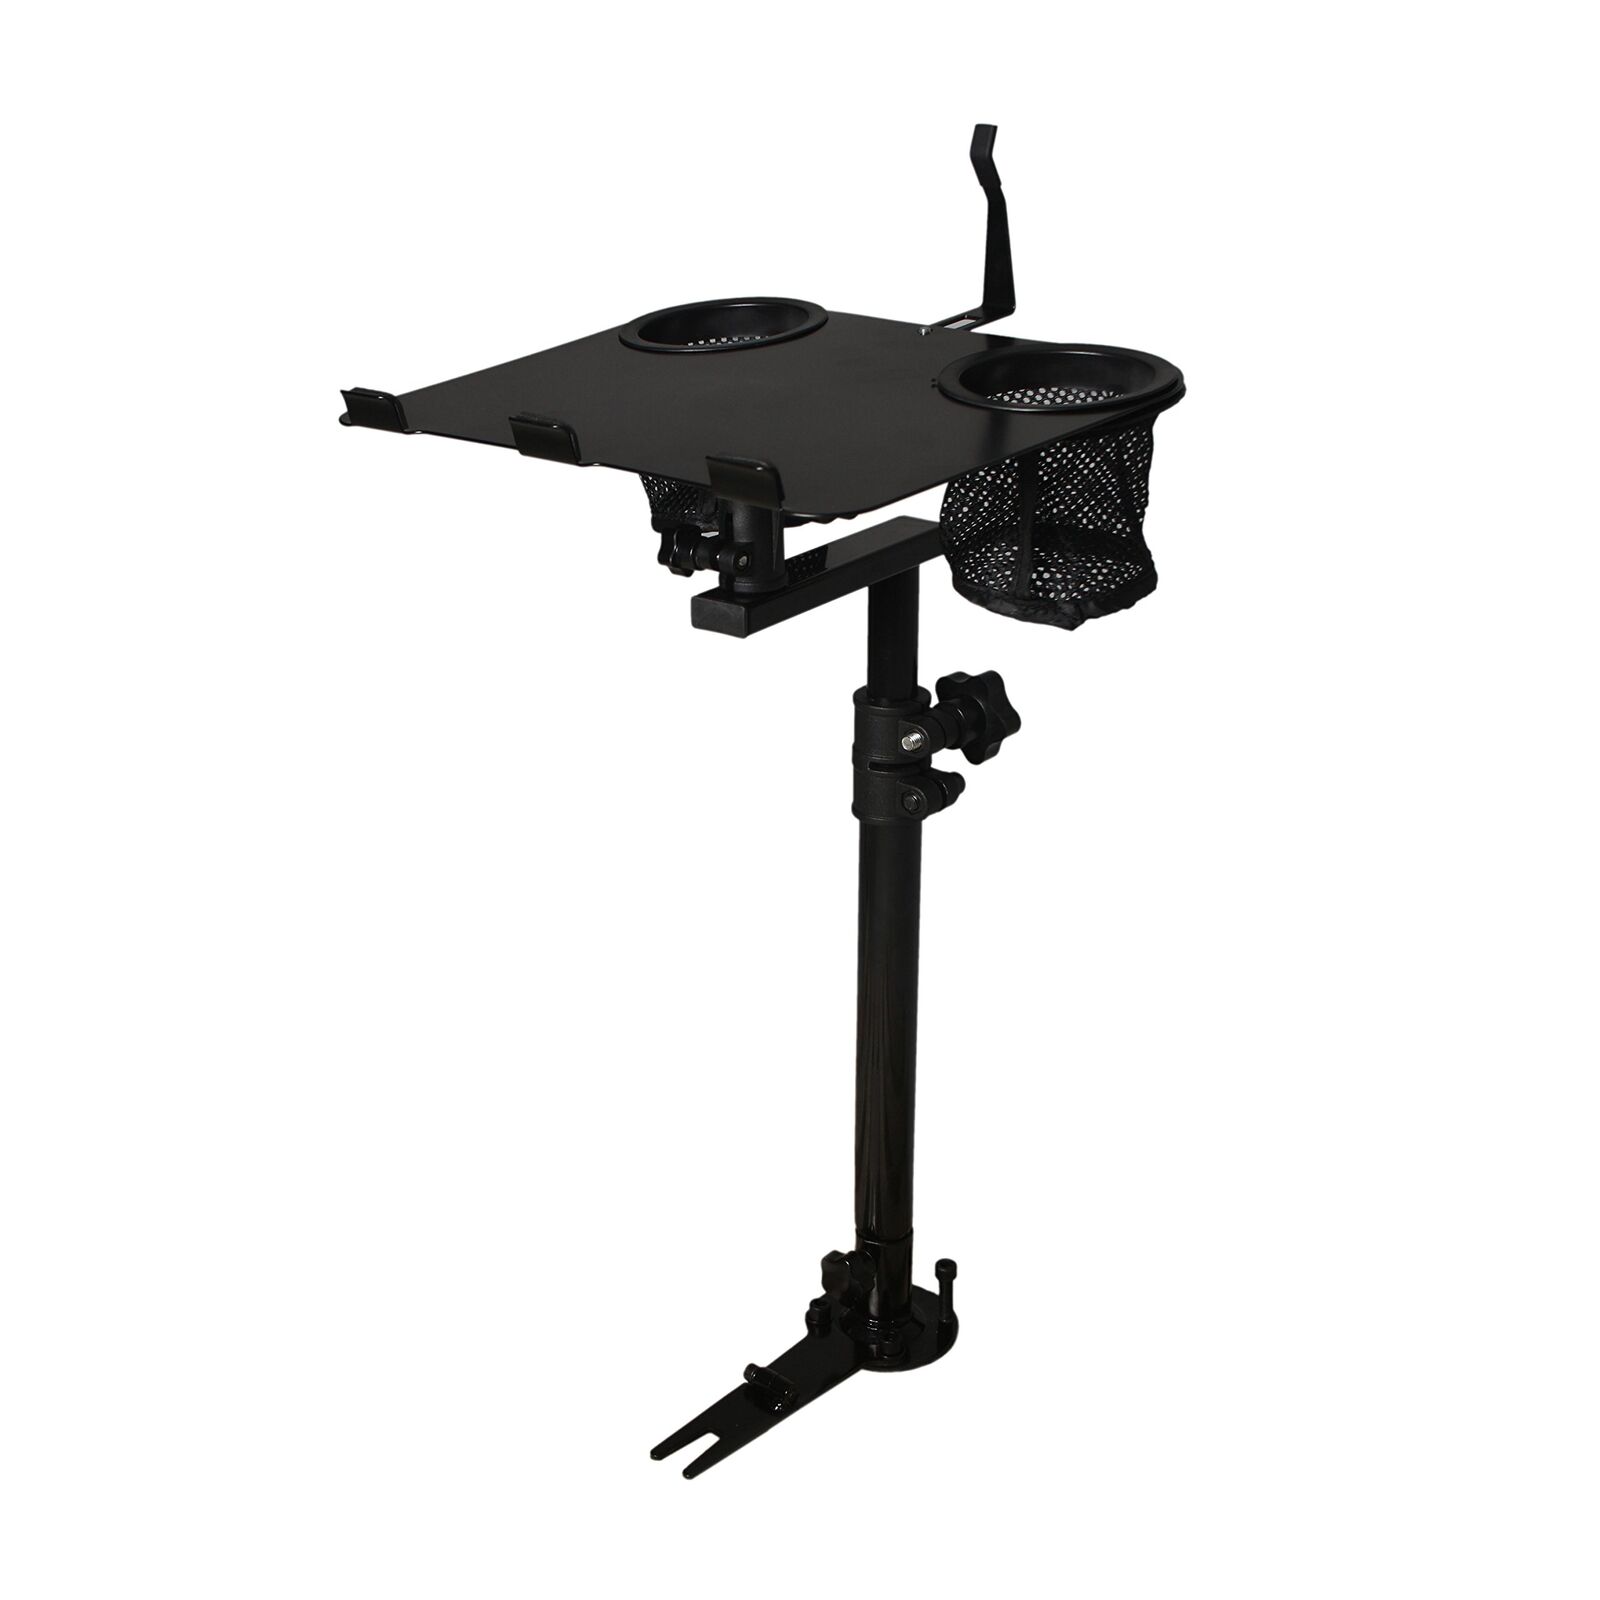 AA Products Inc. K005-B1 Car Laptop Mount Truck Vehicle Notebook Stand Holder...